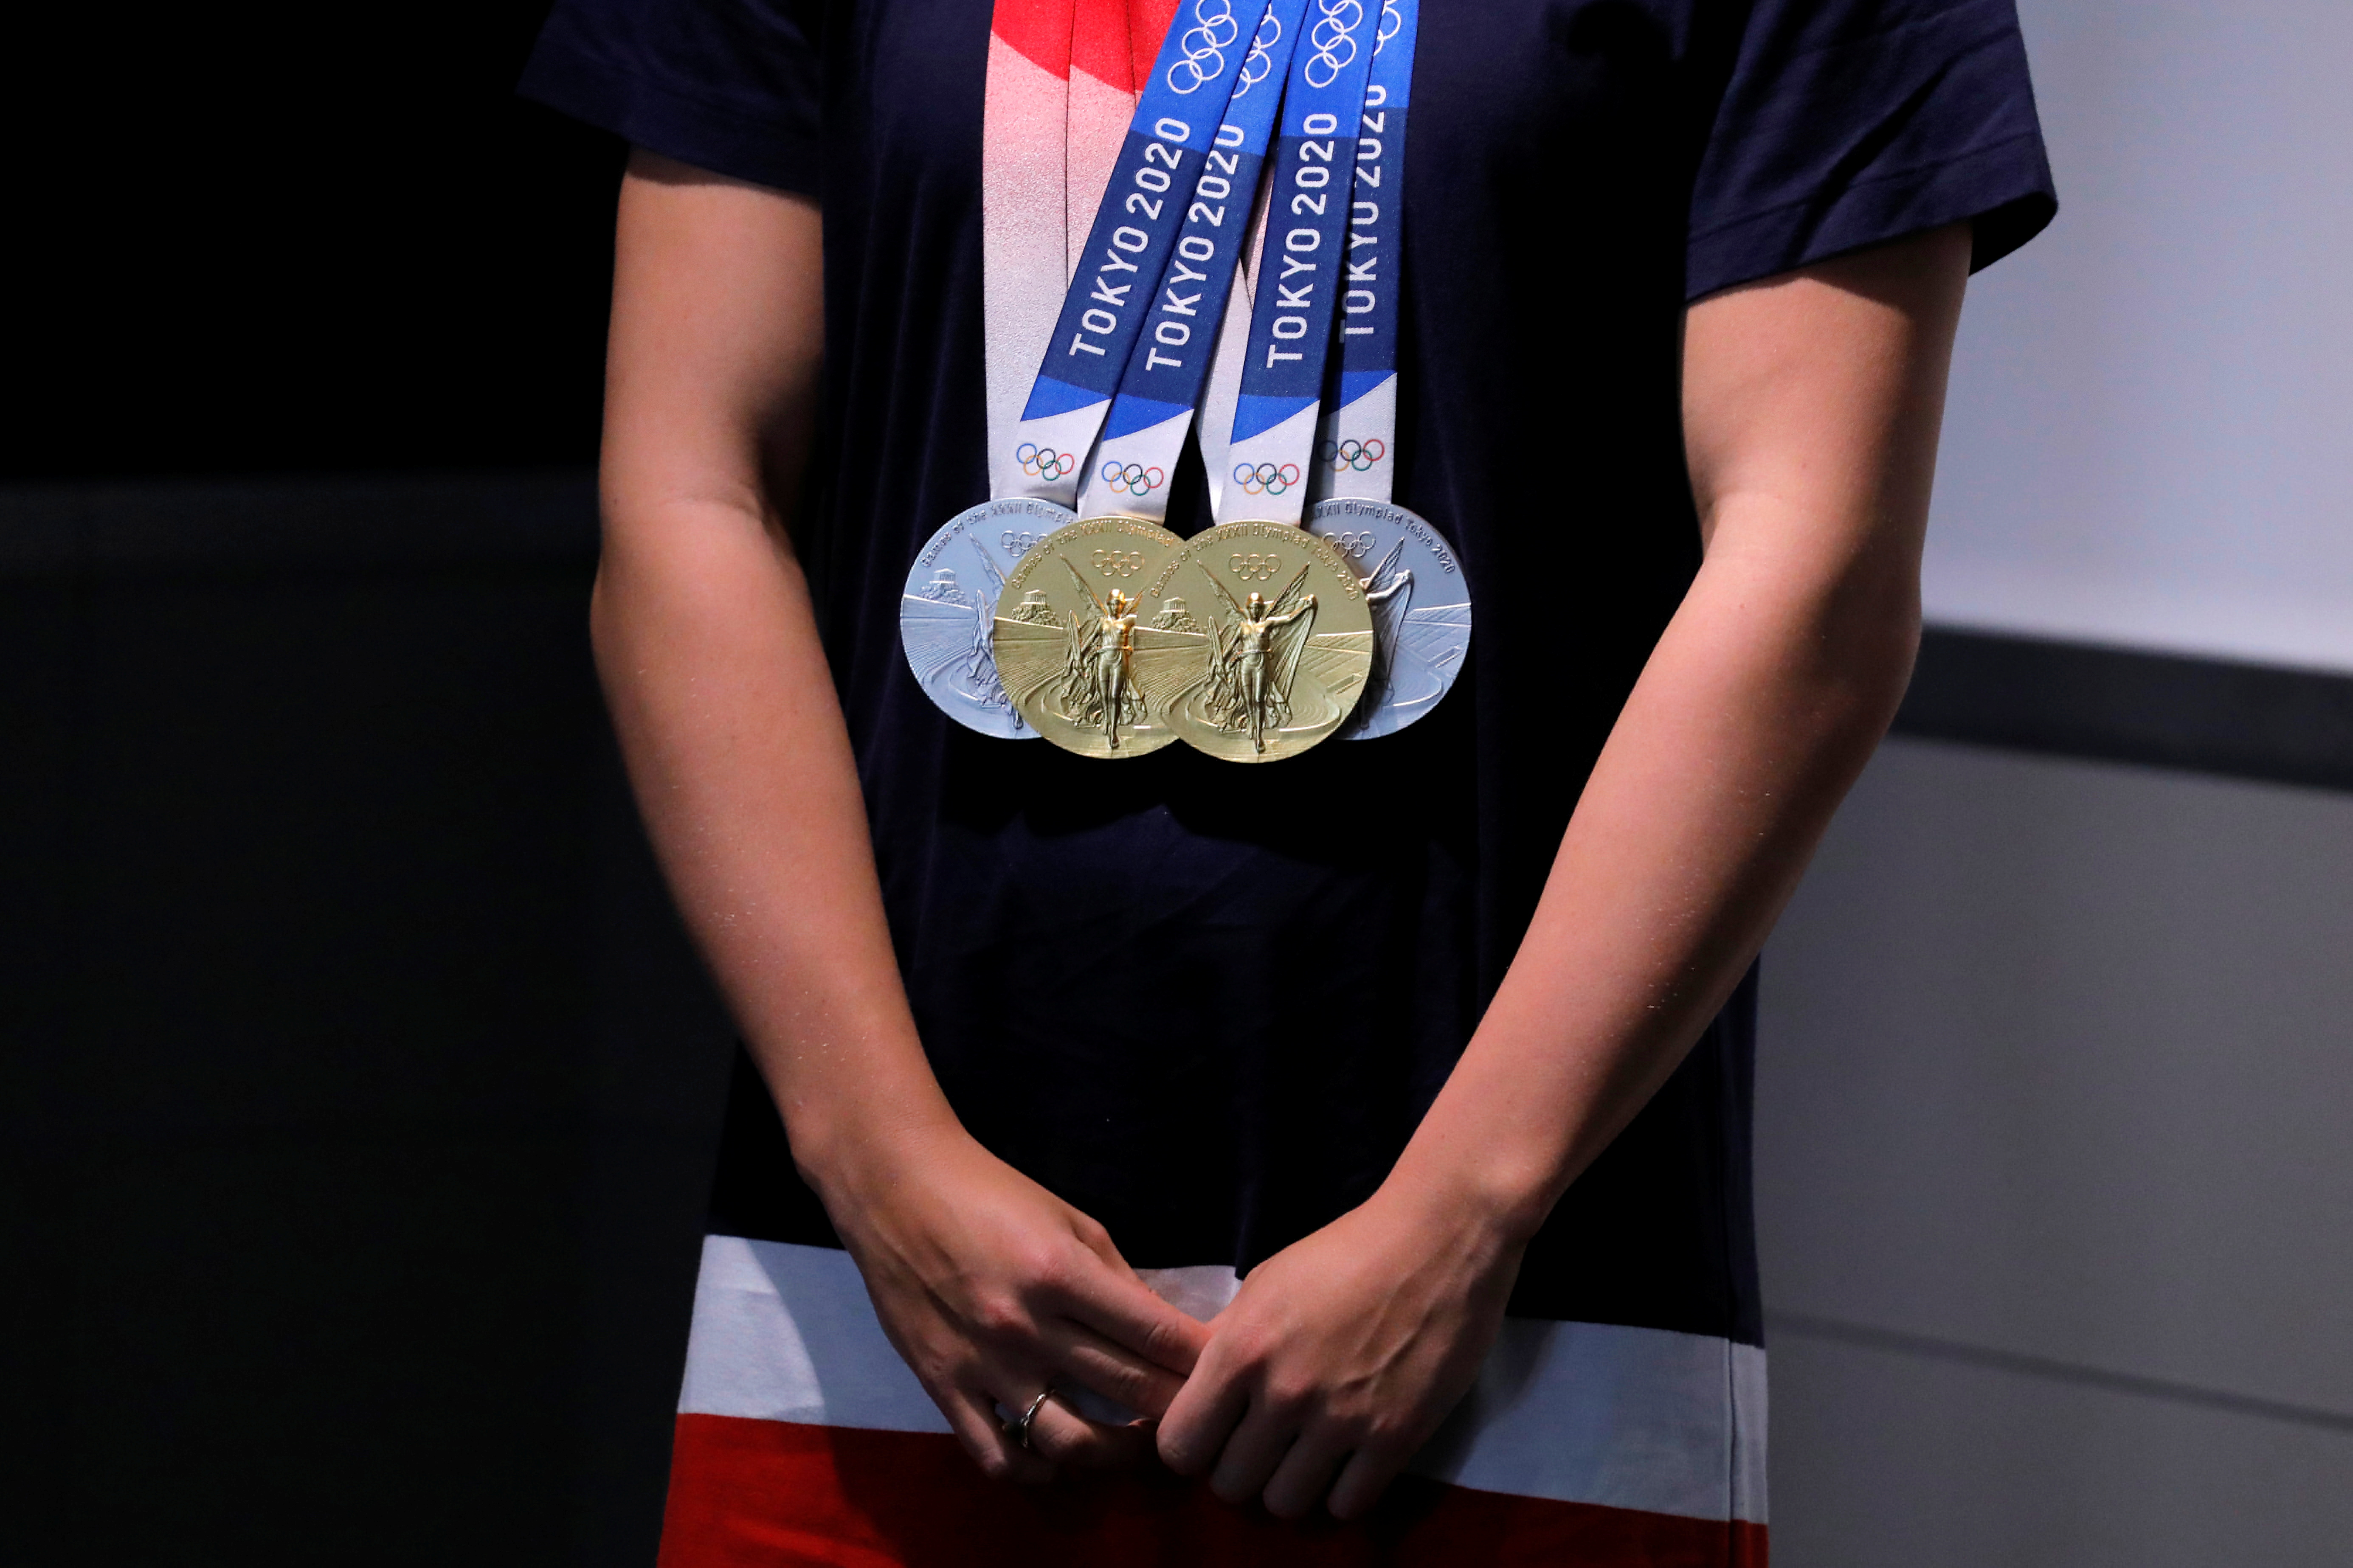 The Tokyo 2020 gold and silver medals of Olympic Team USA swimmer Katie Ledecky are seen hanging on her at the Empire State Building in Manhattan, New York City, U.S., August 12, 2021. REUTERS/Andrew Kelly